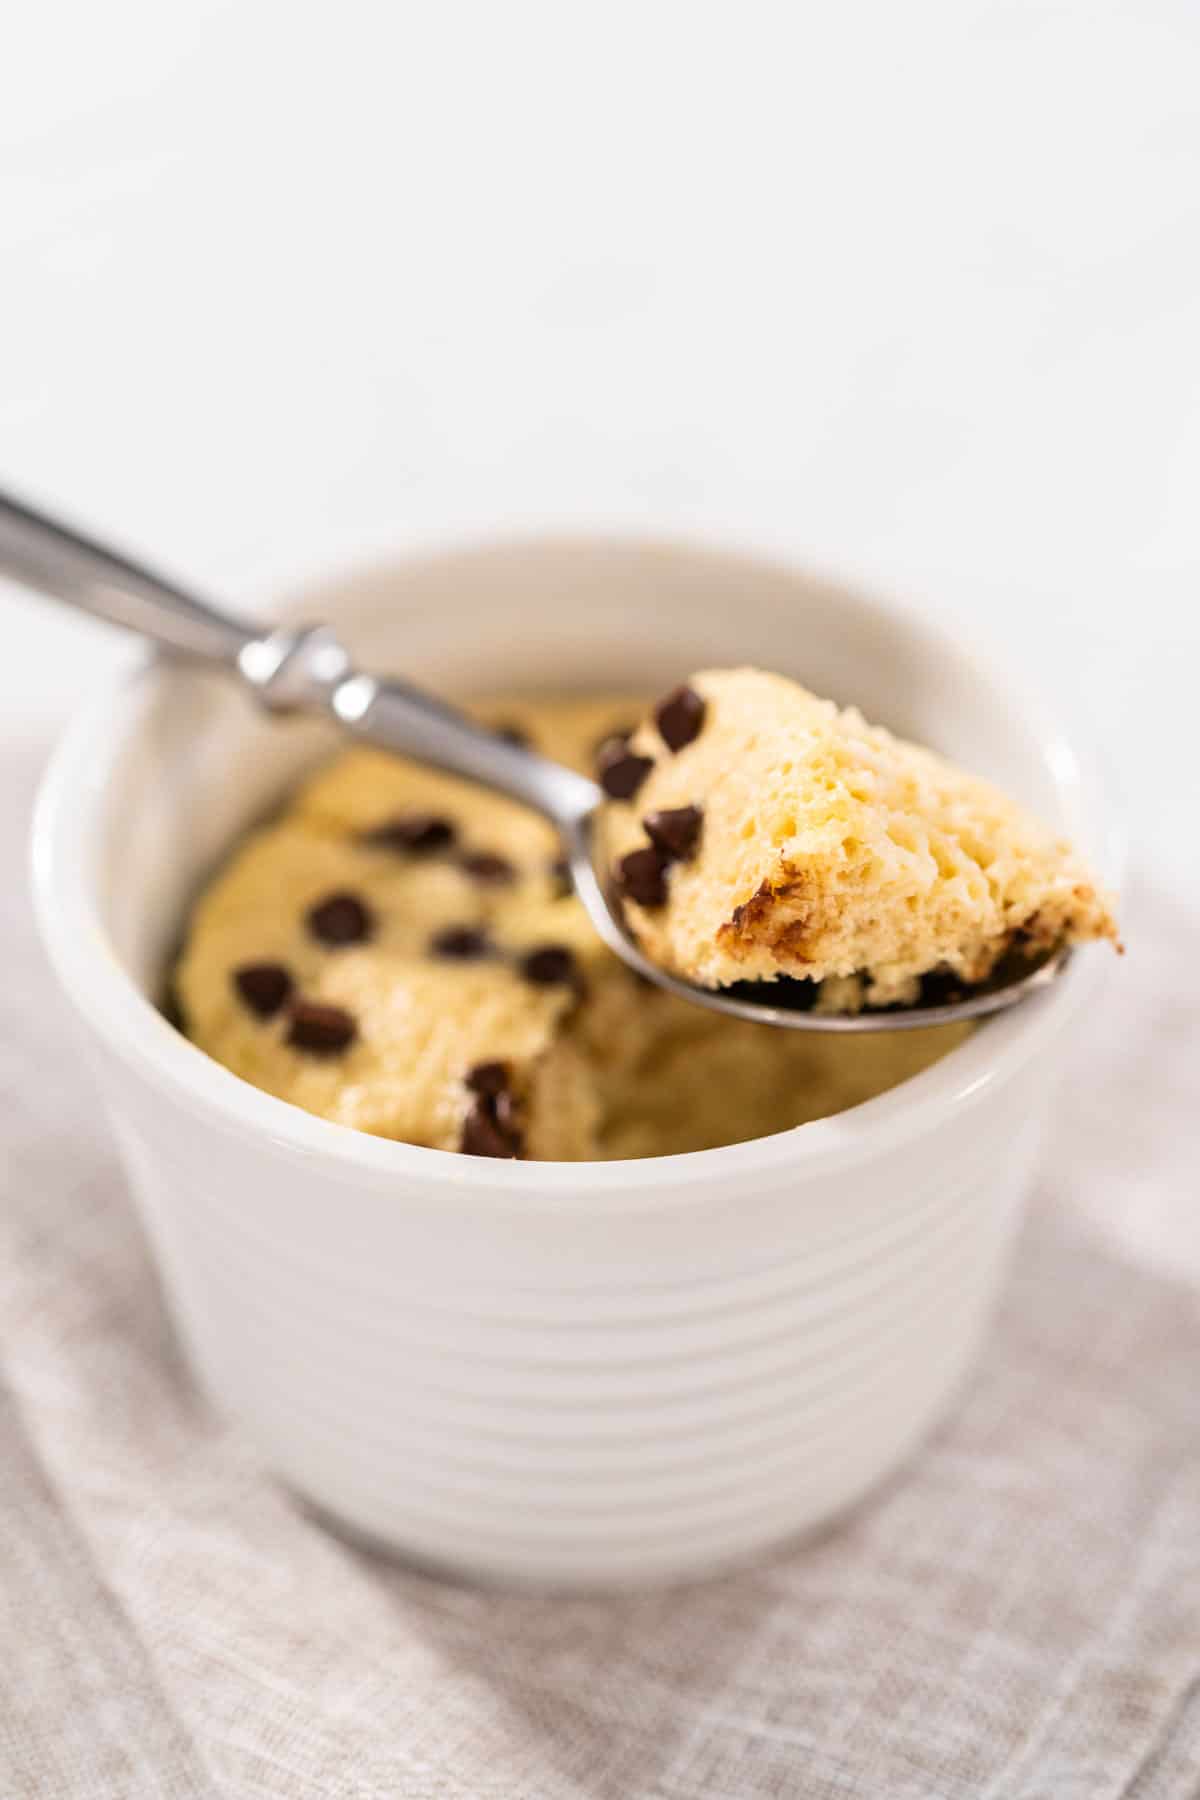 A spoonful of chocolate chip protein baked oats.